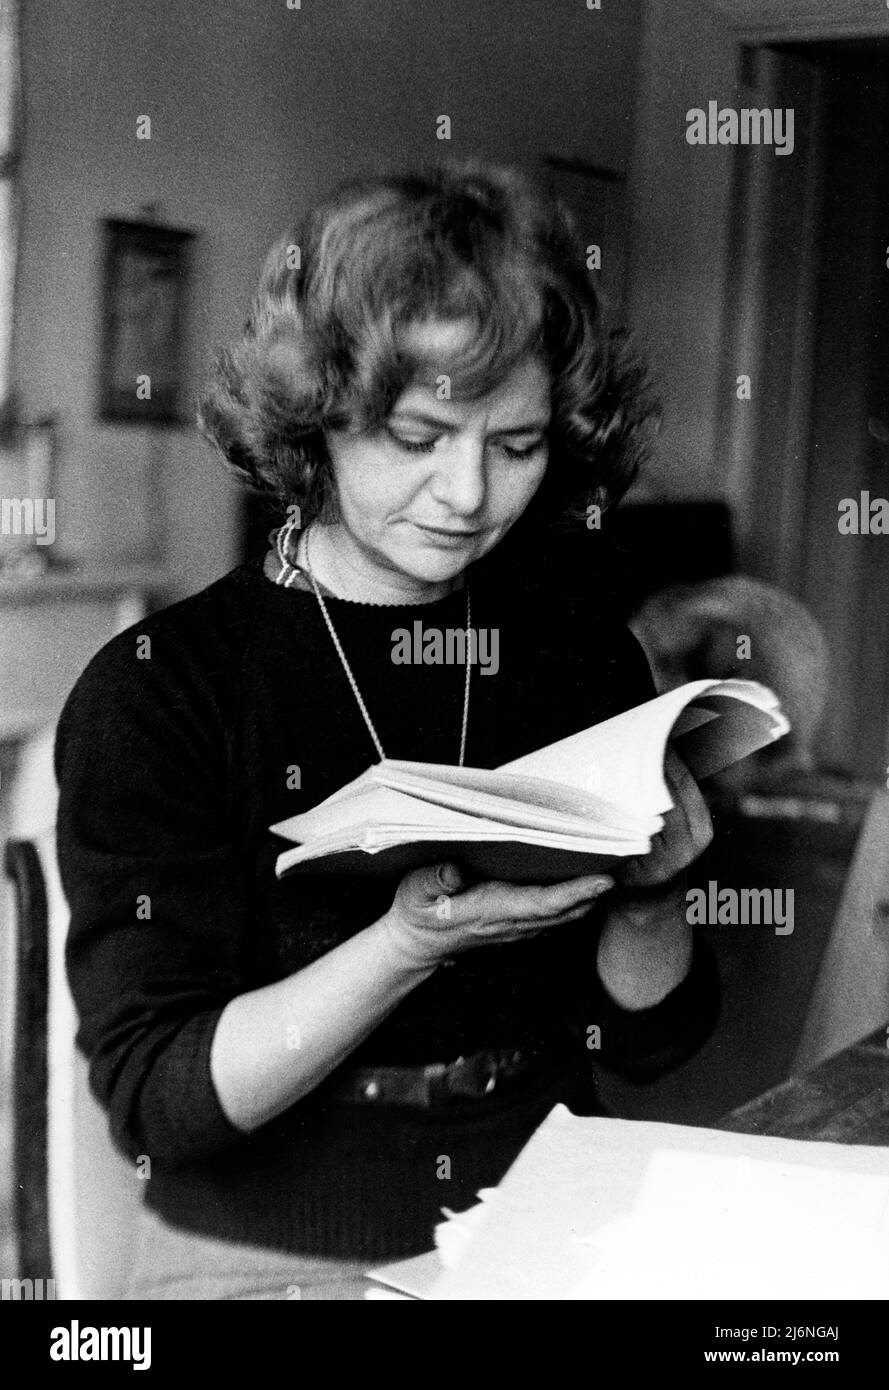 Elsa Morante (1912-1985) Italian novelist and poet bet remembered for her novel La storia (History) which is included in the Bokklubben World Library List of 100 Best Books of All Time. Stock Photo